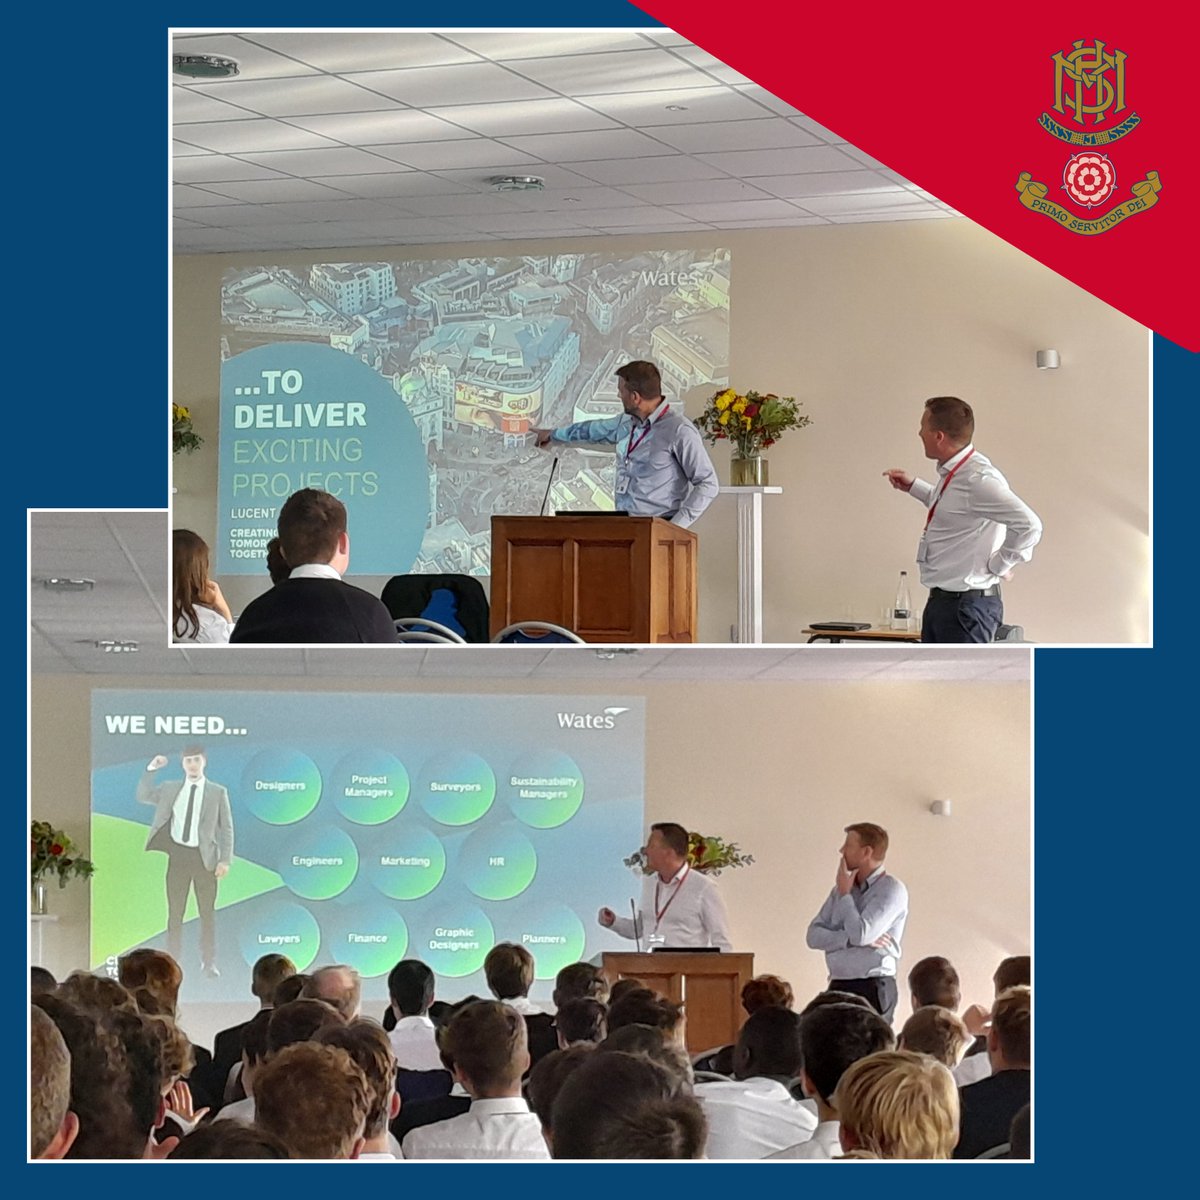 Thanks to @WatesGroup for talking to #MHS Year 10&11s about careers in construction!

#MoreHouseSchool #Farnham #dyslexia #apprenciteships #lifeafterschool #careeeropportunities #careers #nextsteps #watesconstruction #transformativeeducation #independentschool #fridaymotivation